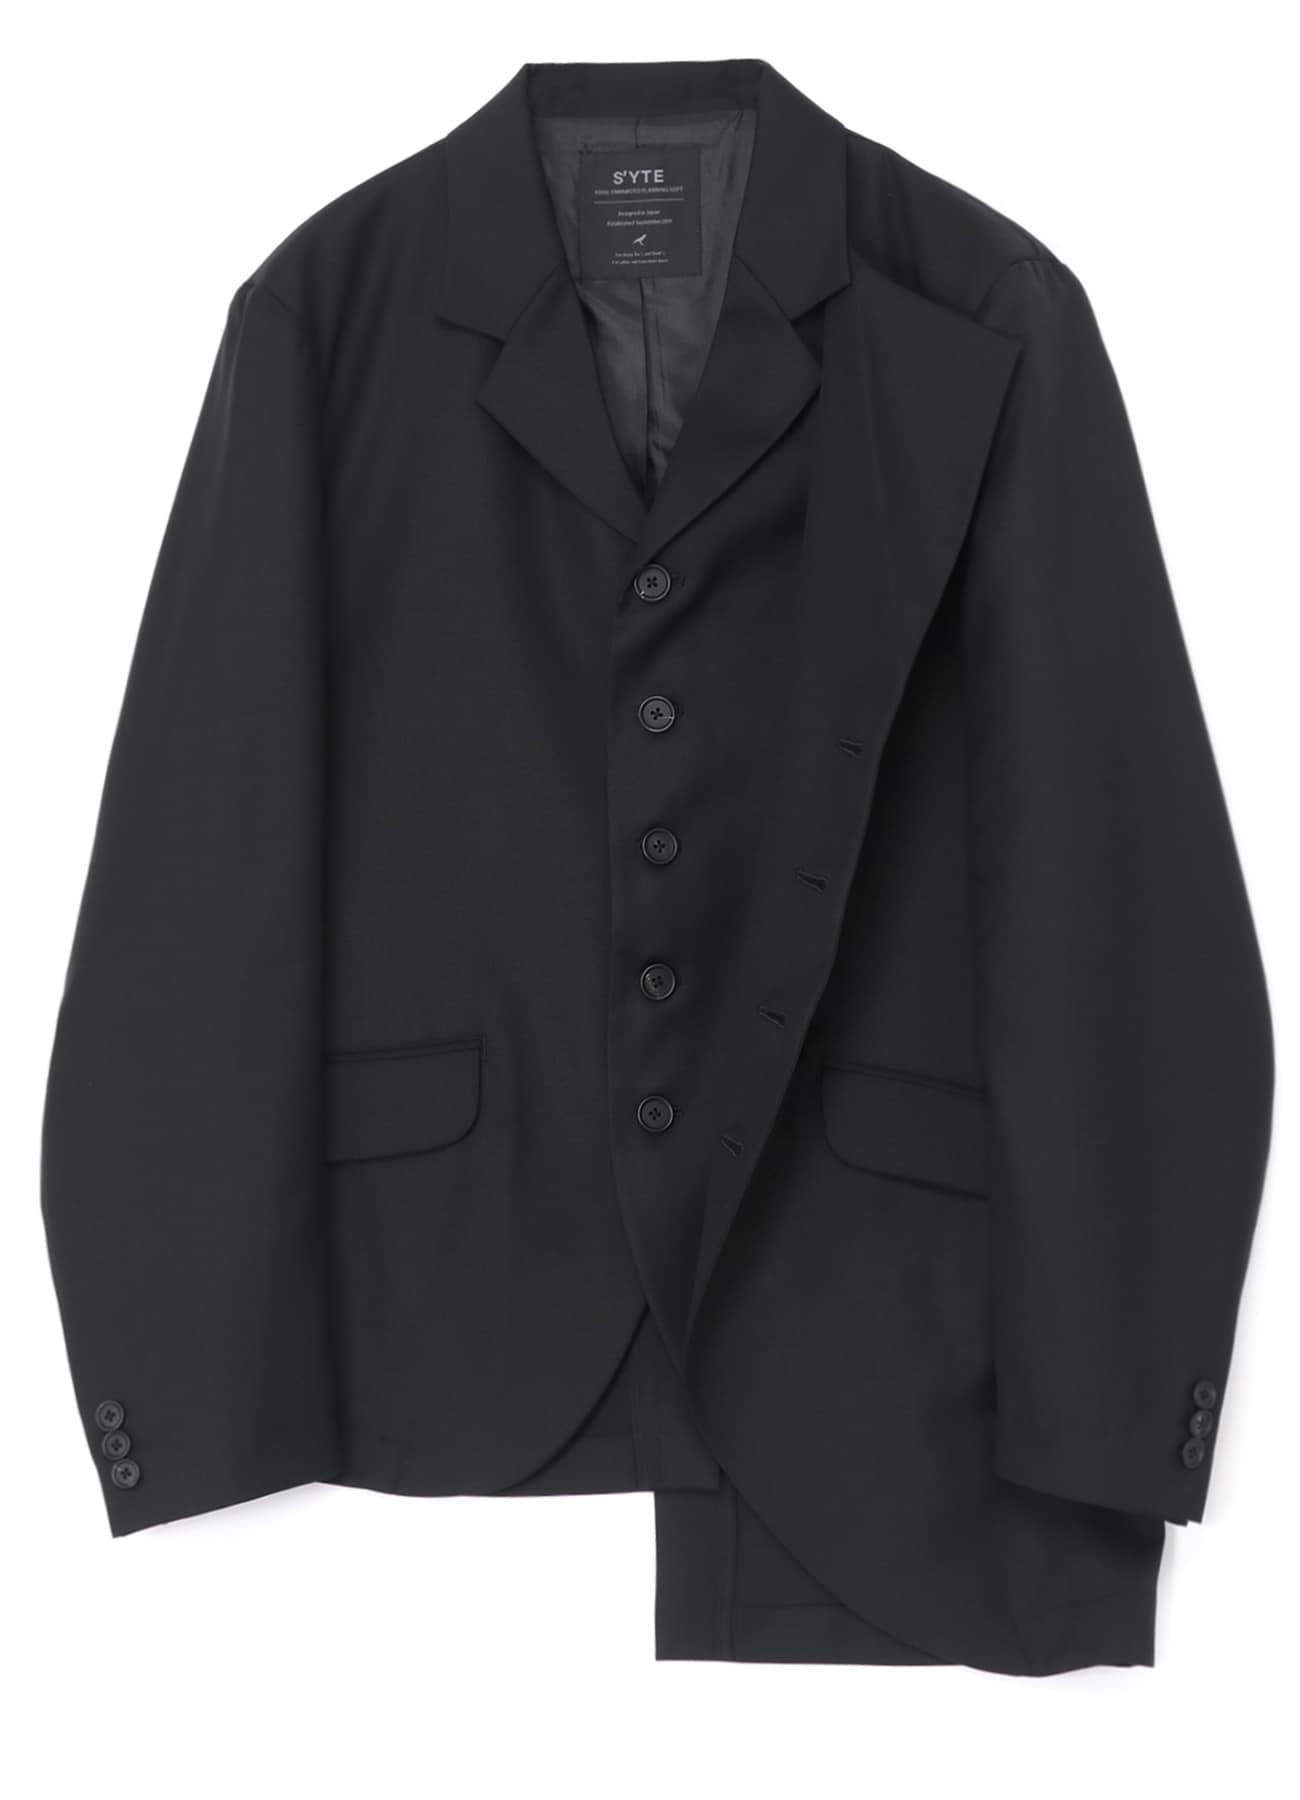 T/W GABARDINE JACKET WITH DOUBLE-TAILORED LEFT FRONT(M Black): S 